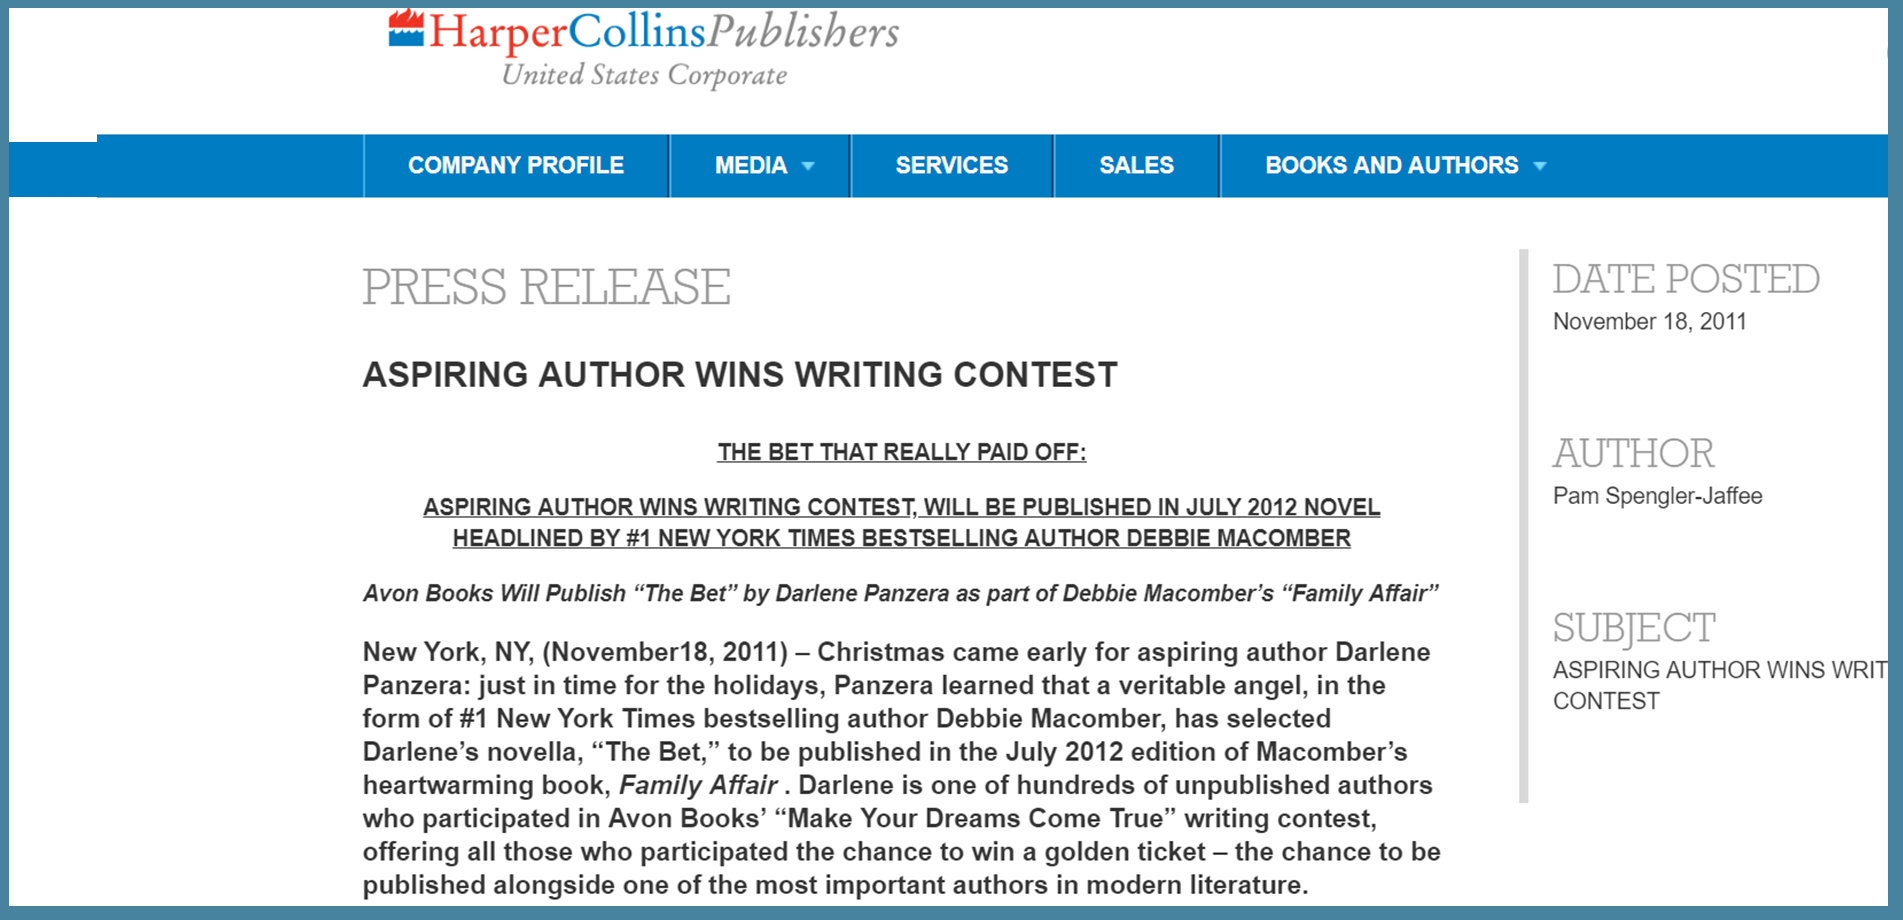 ASPIRING-AUTHOR-WINS-WRITING-CONTEST-HarperCollins-Publishers-3